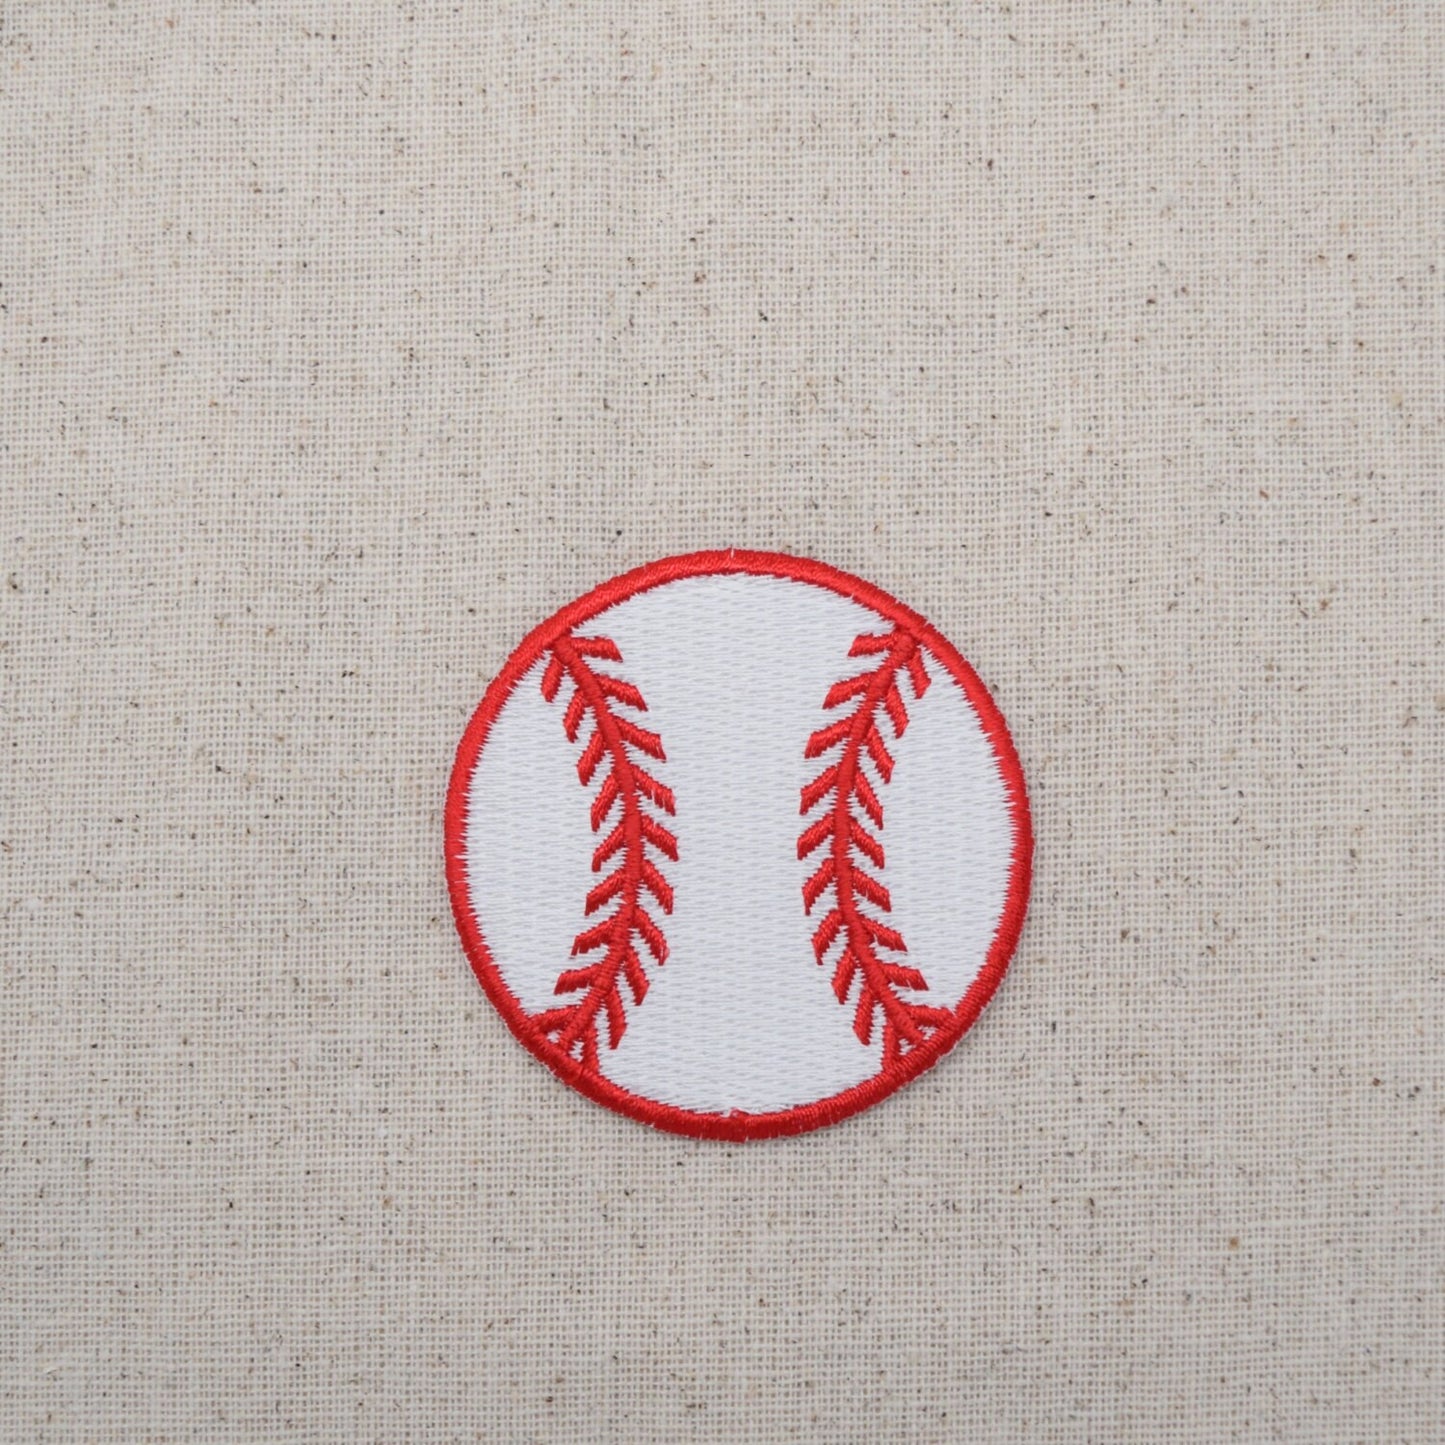 Large - Baseball - Red and White - Embroidered Patch - Iron on Applique  - WA228-B